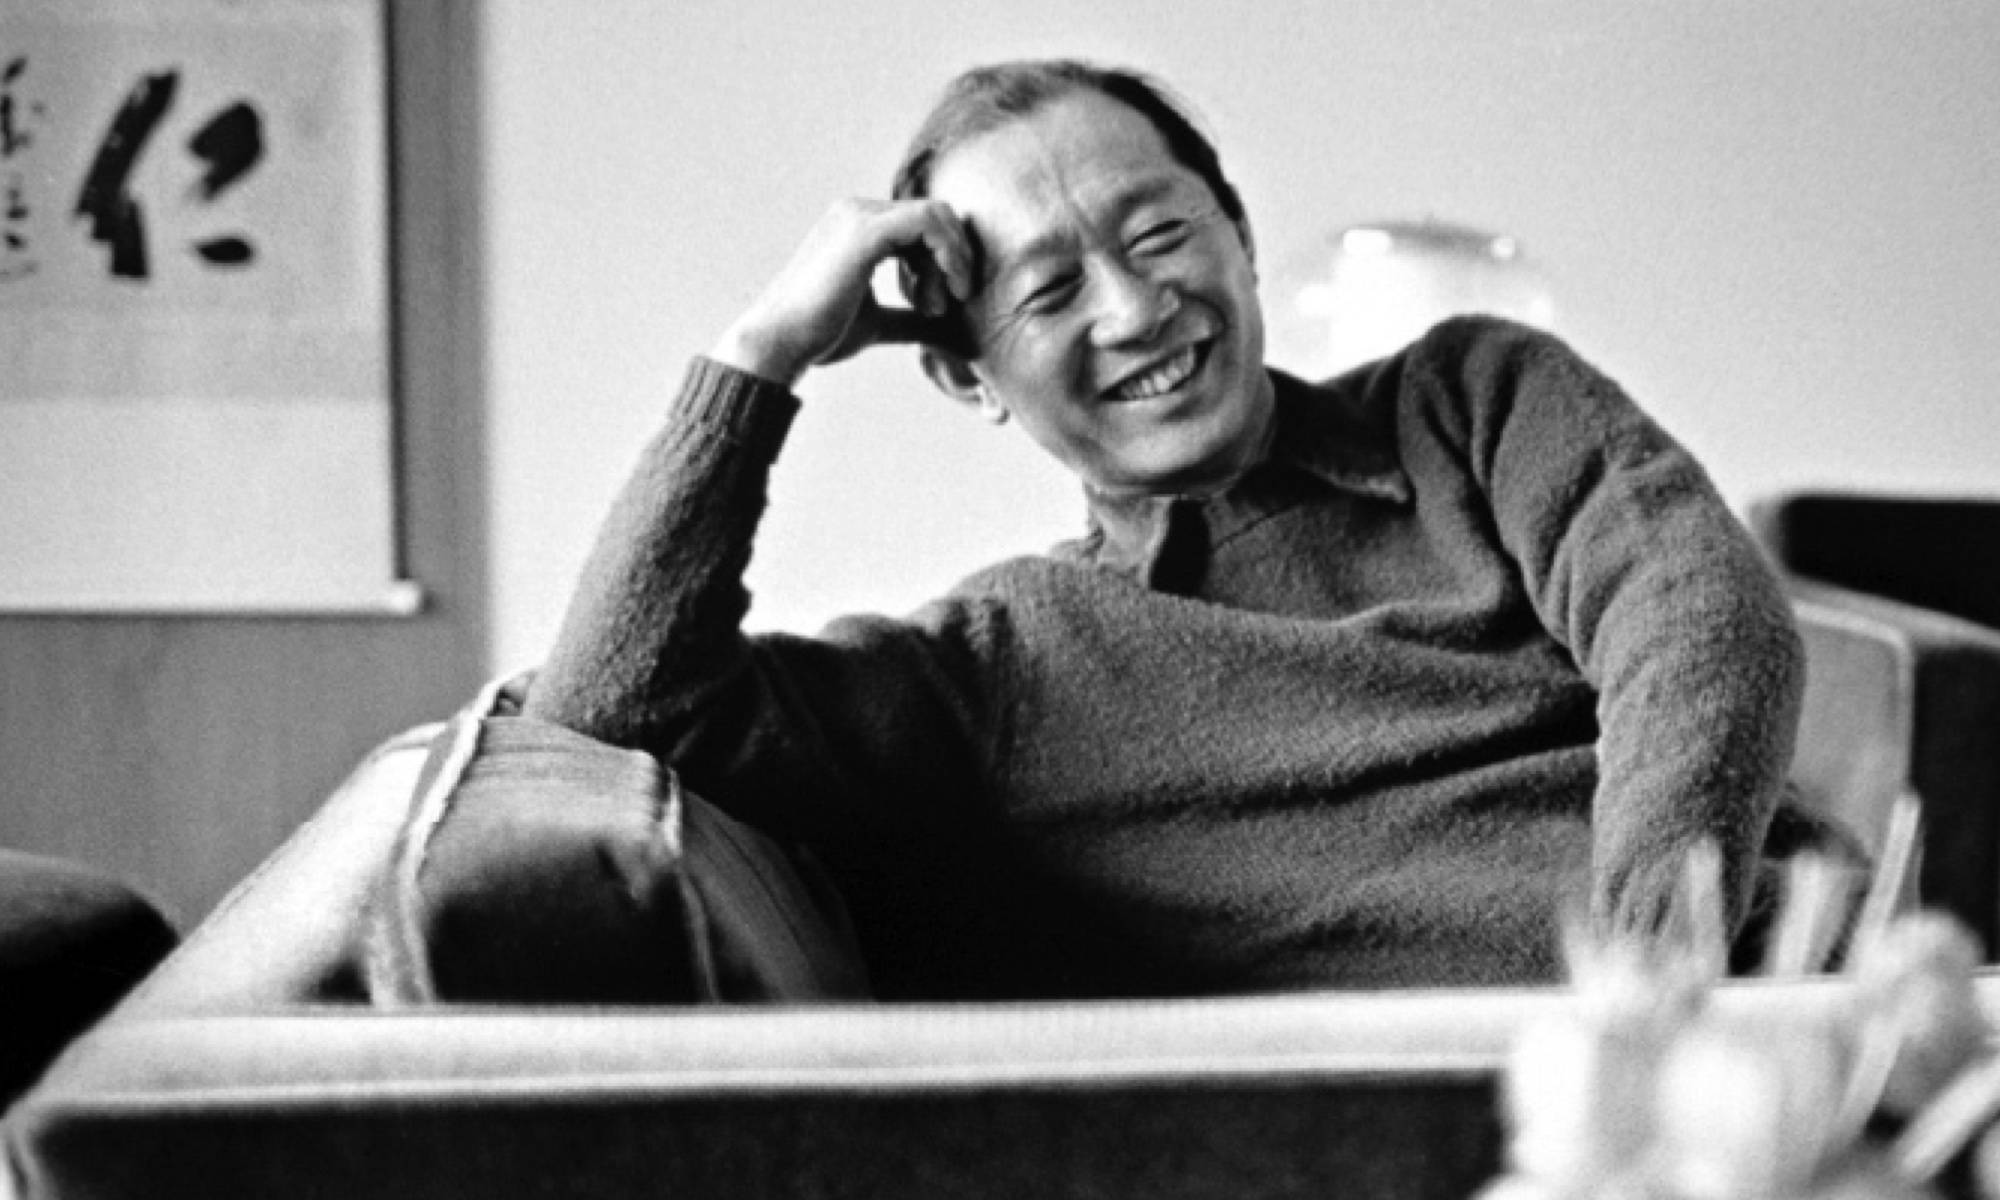 Yama, the iconic new formalism architect, laughing on mid century style couch